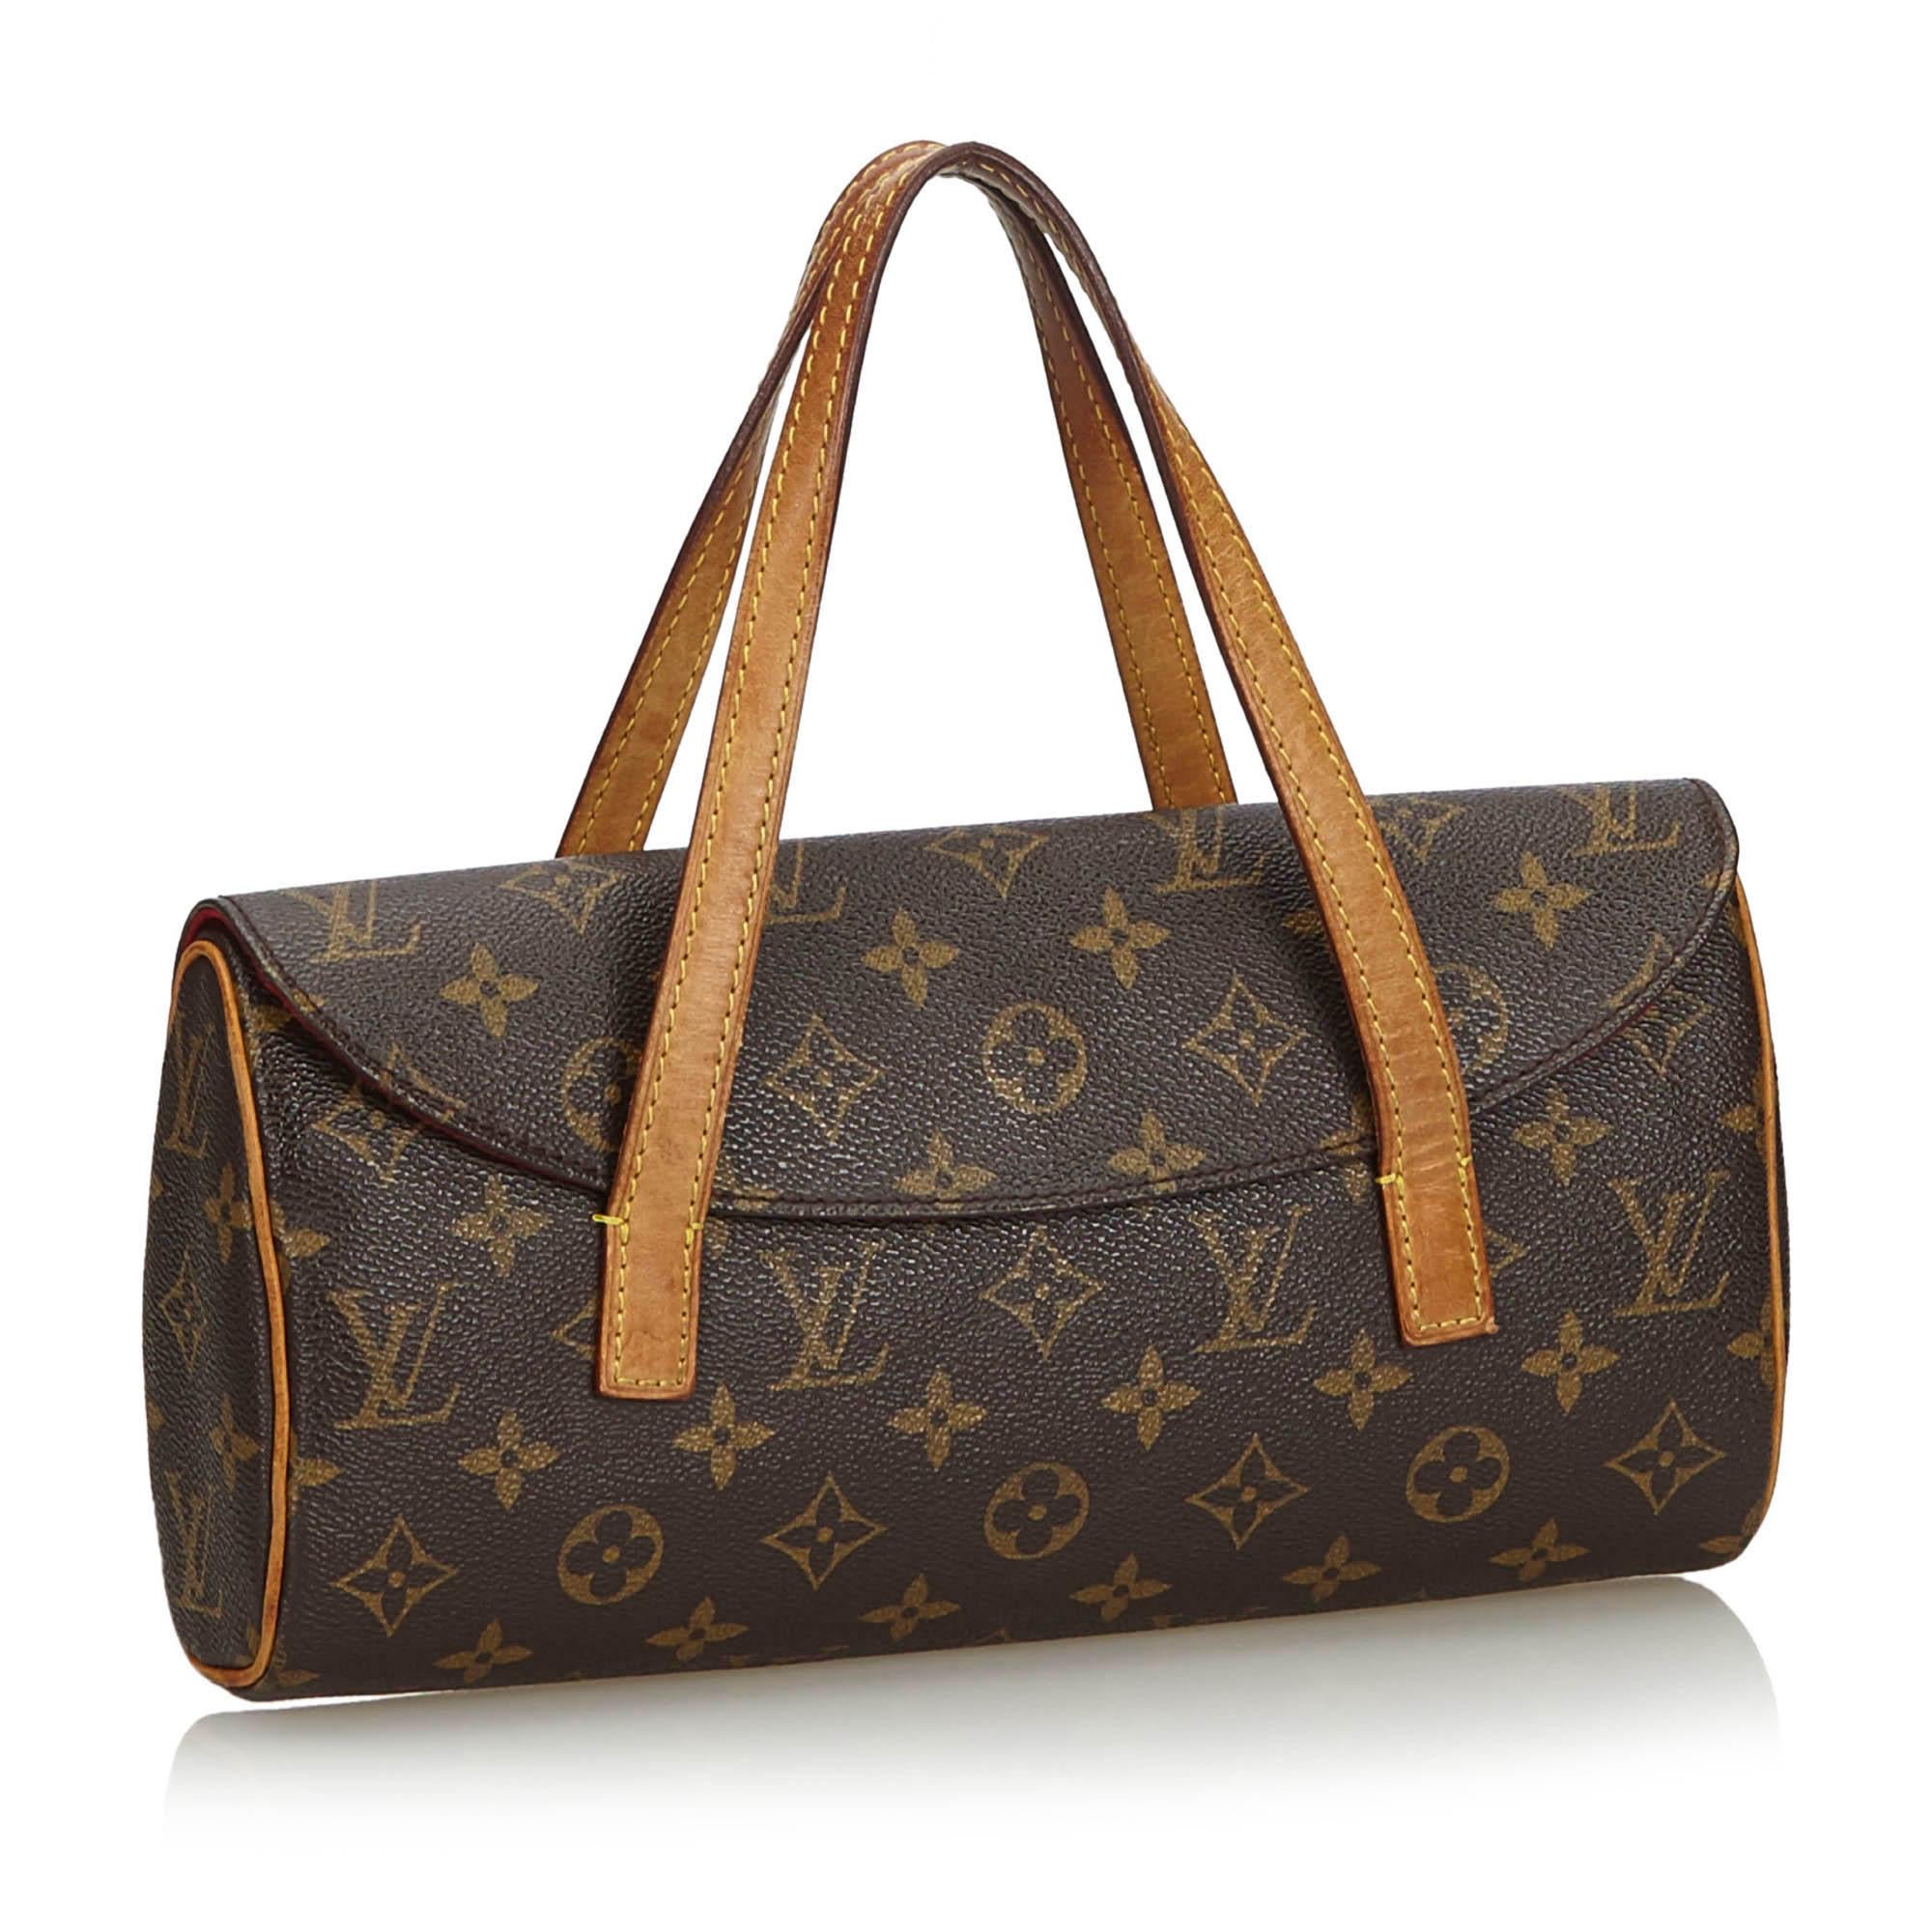 The Sonatine features the Monogram canvas, flat vachetta straps, a front flap, Alcantara lining, and an interior slip pocket. It carries as B condition rating.

Inclusions: 
This item does not come with inclusions.


Louis Vuitton pieces do not come